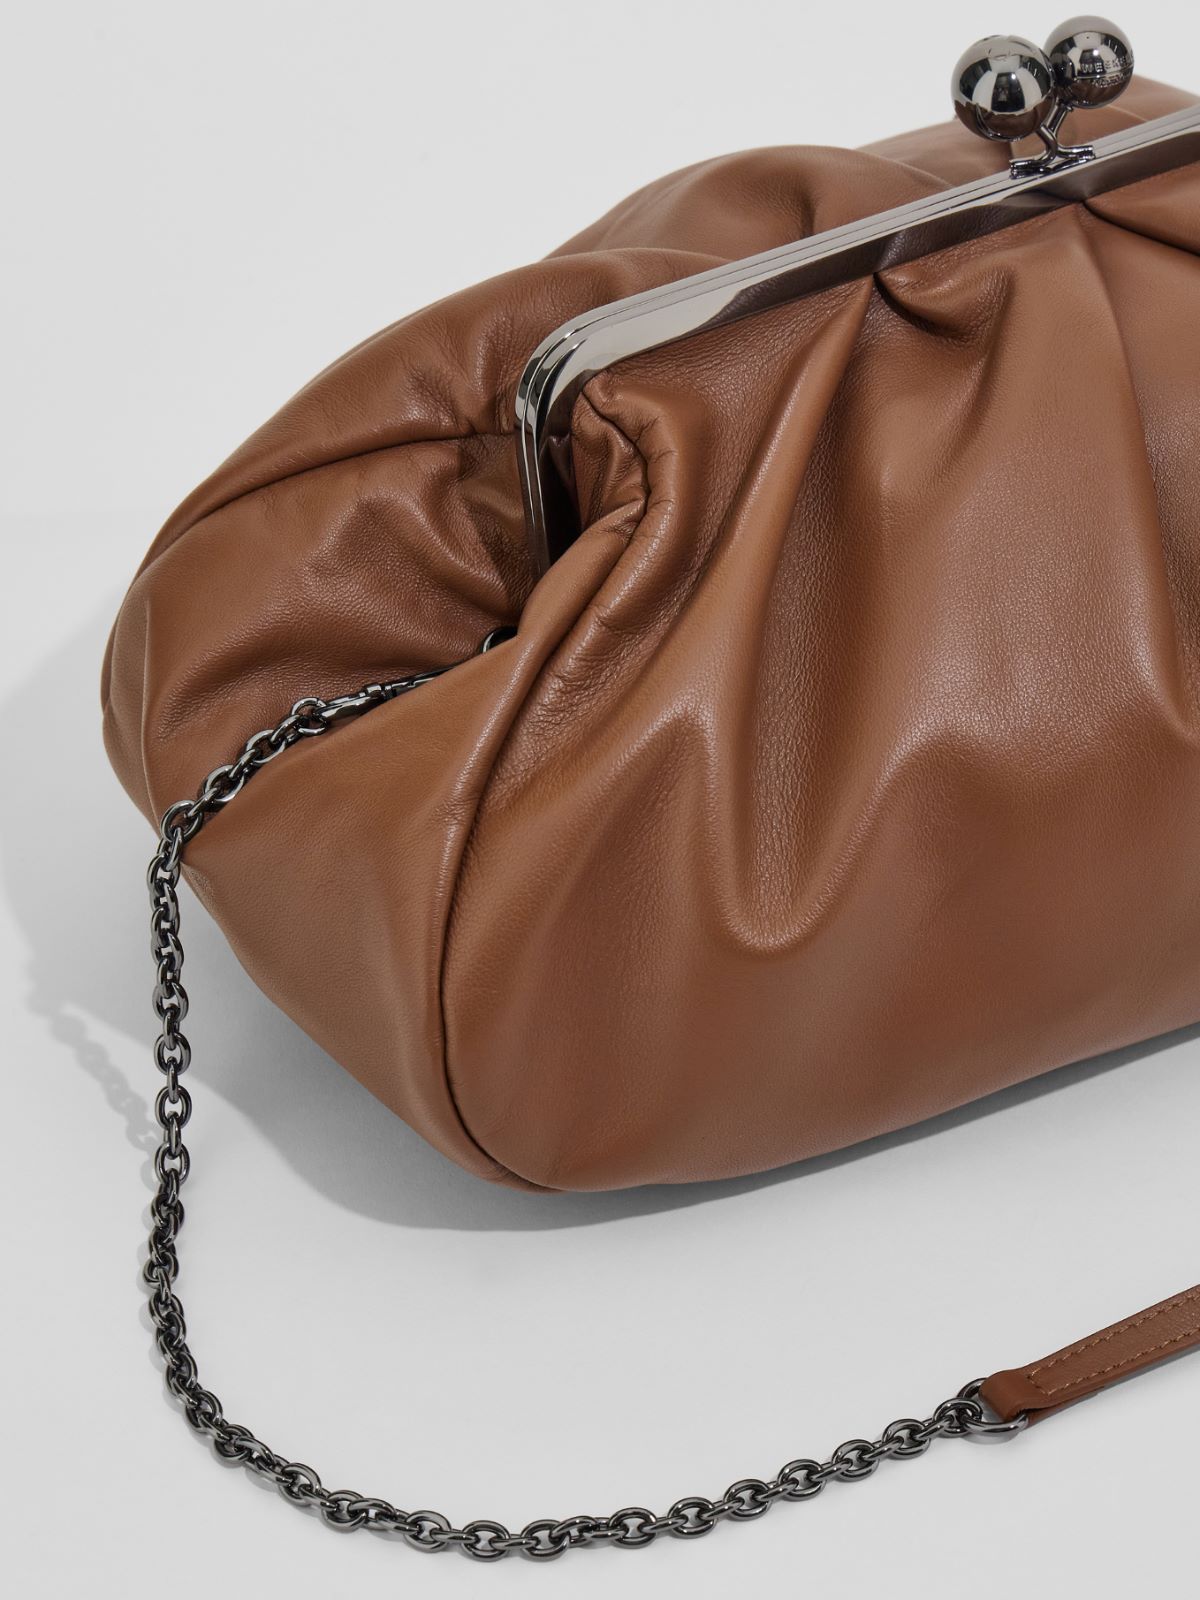 Large leather Pasticcino Bag  - TOBACCO - Weekend Max Mara - 5